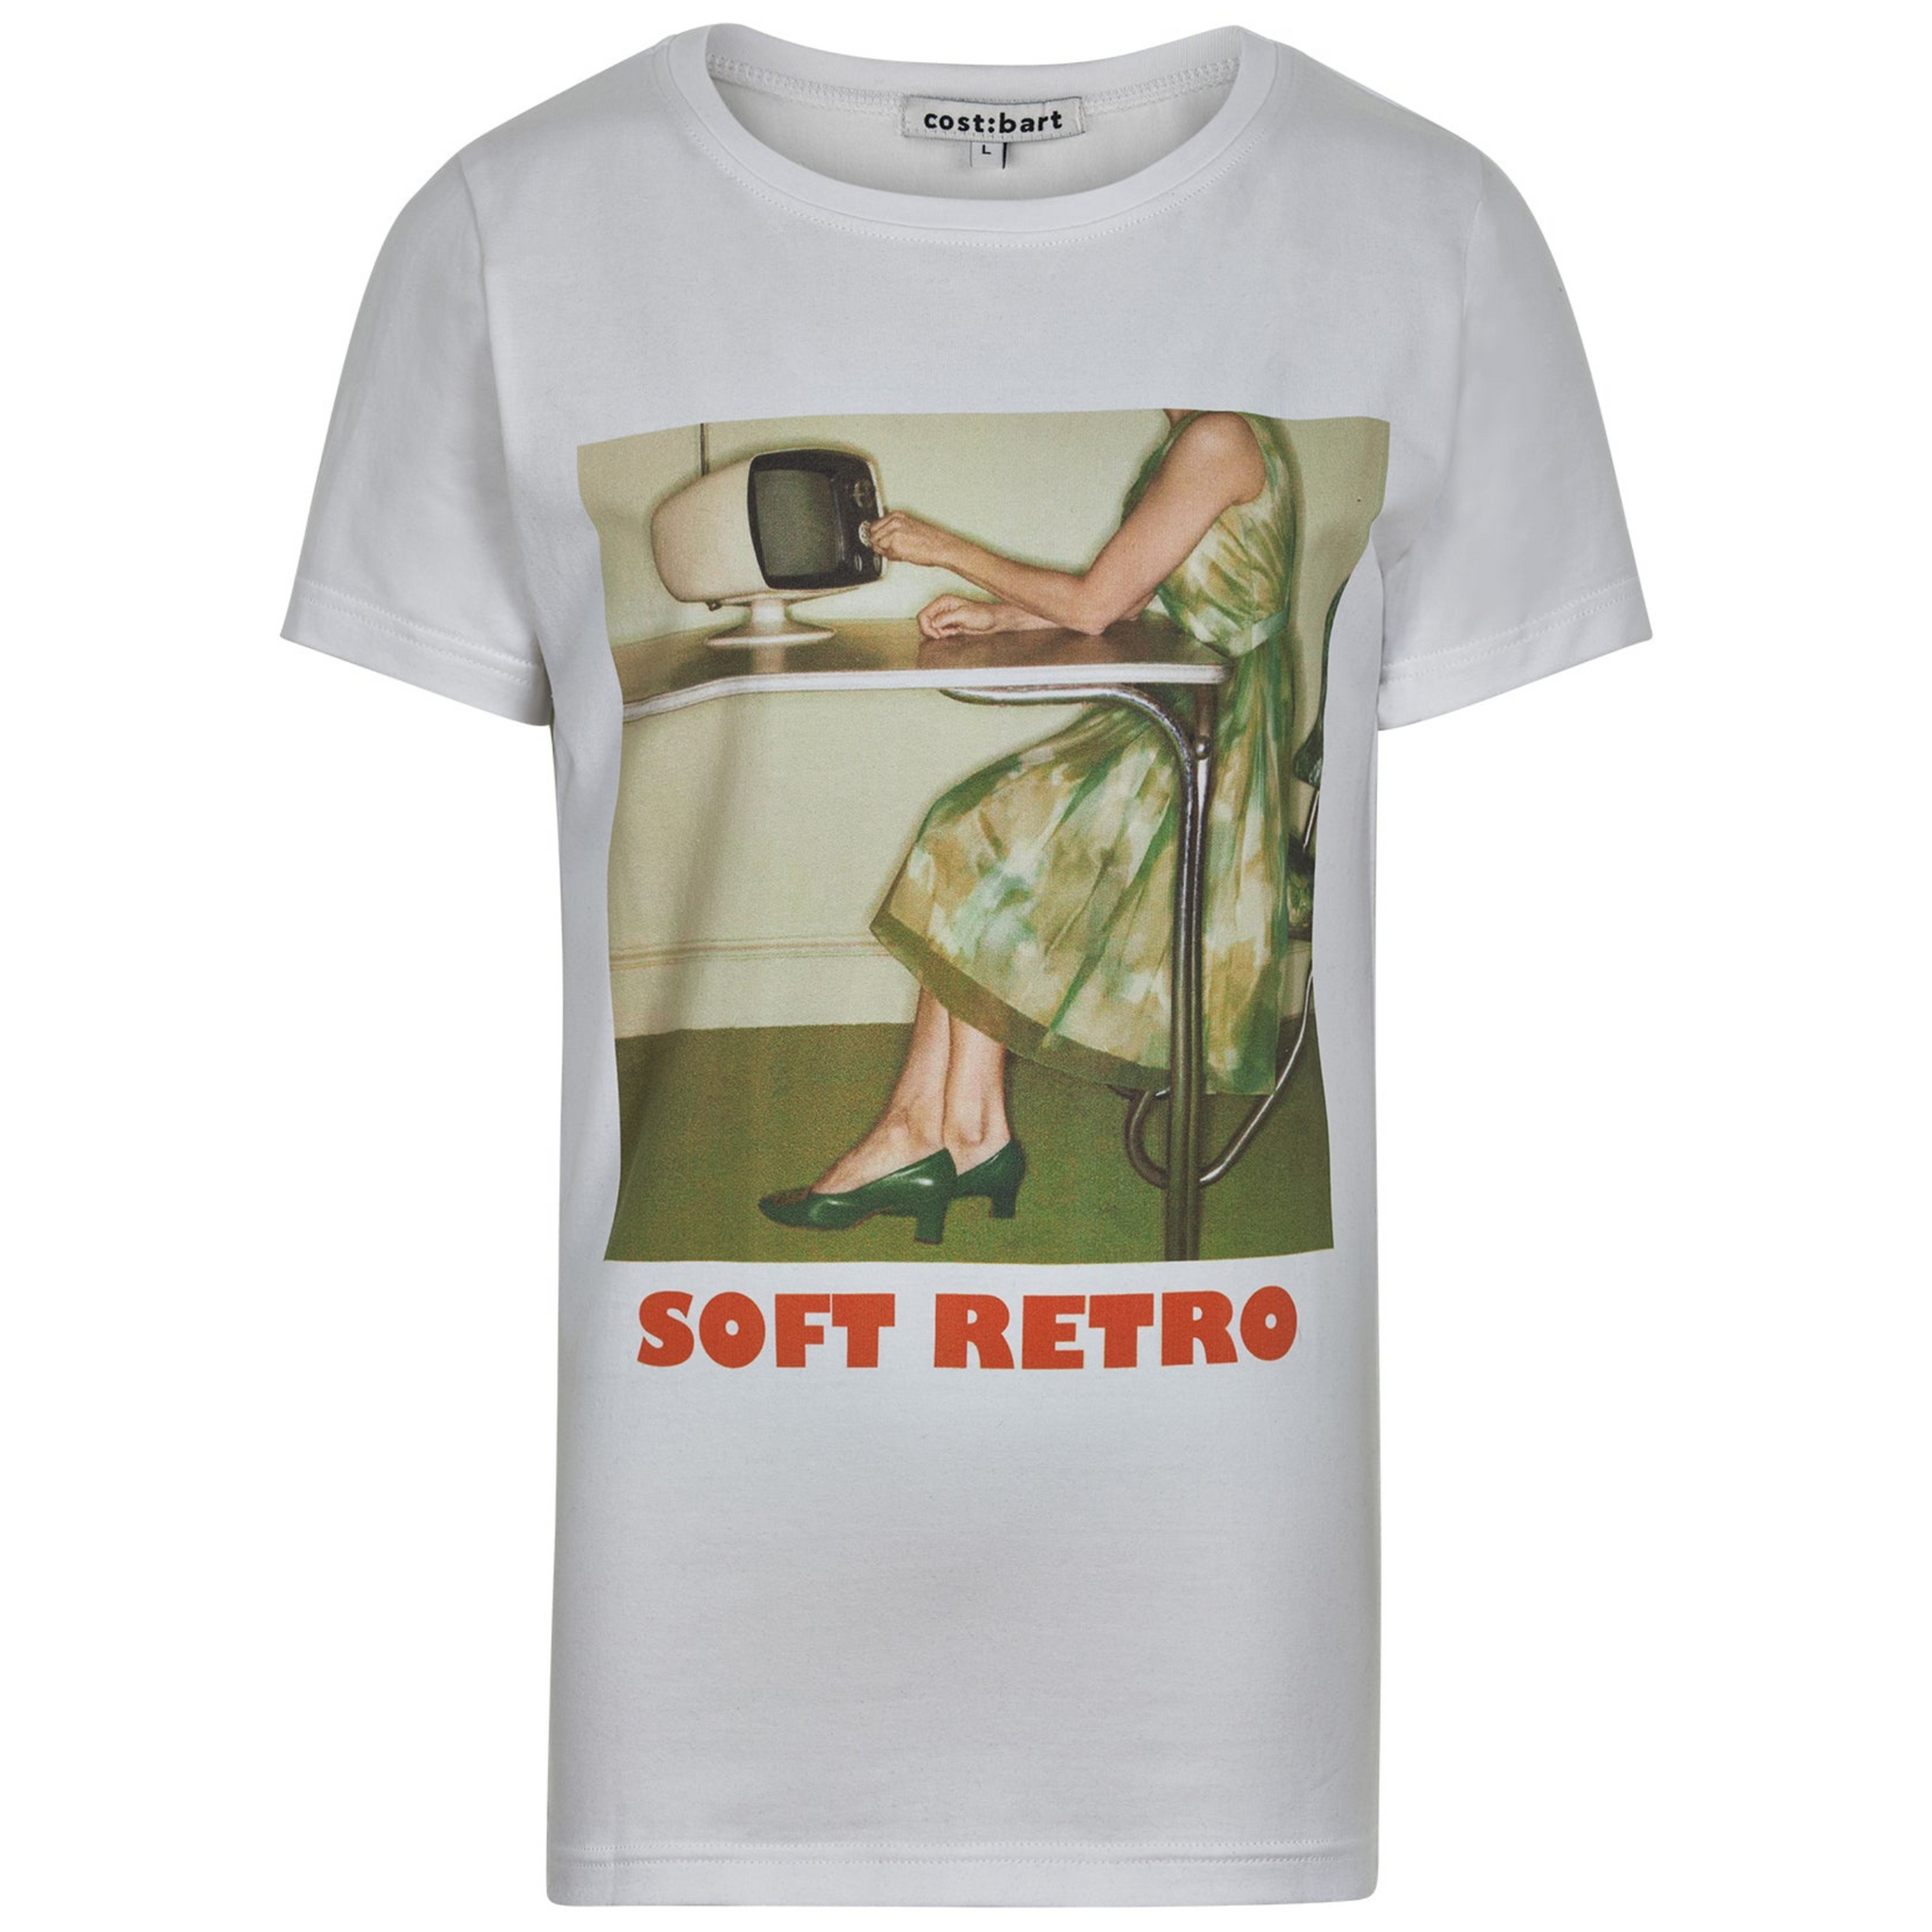 Cost:Bart - Ohill Tee SS (C4815) - Bright White